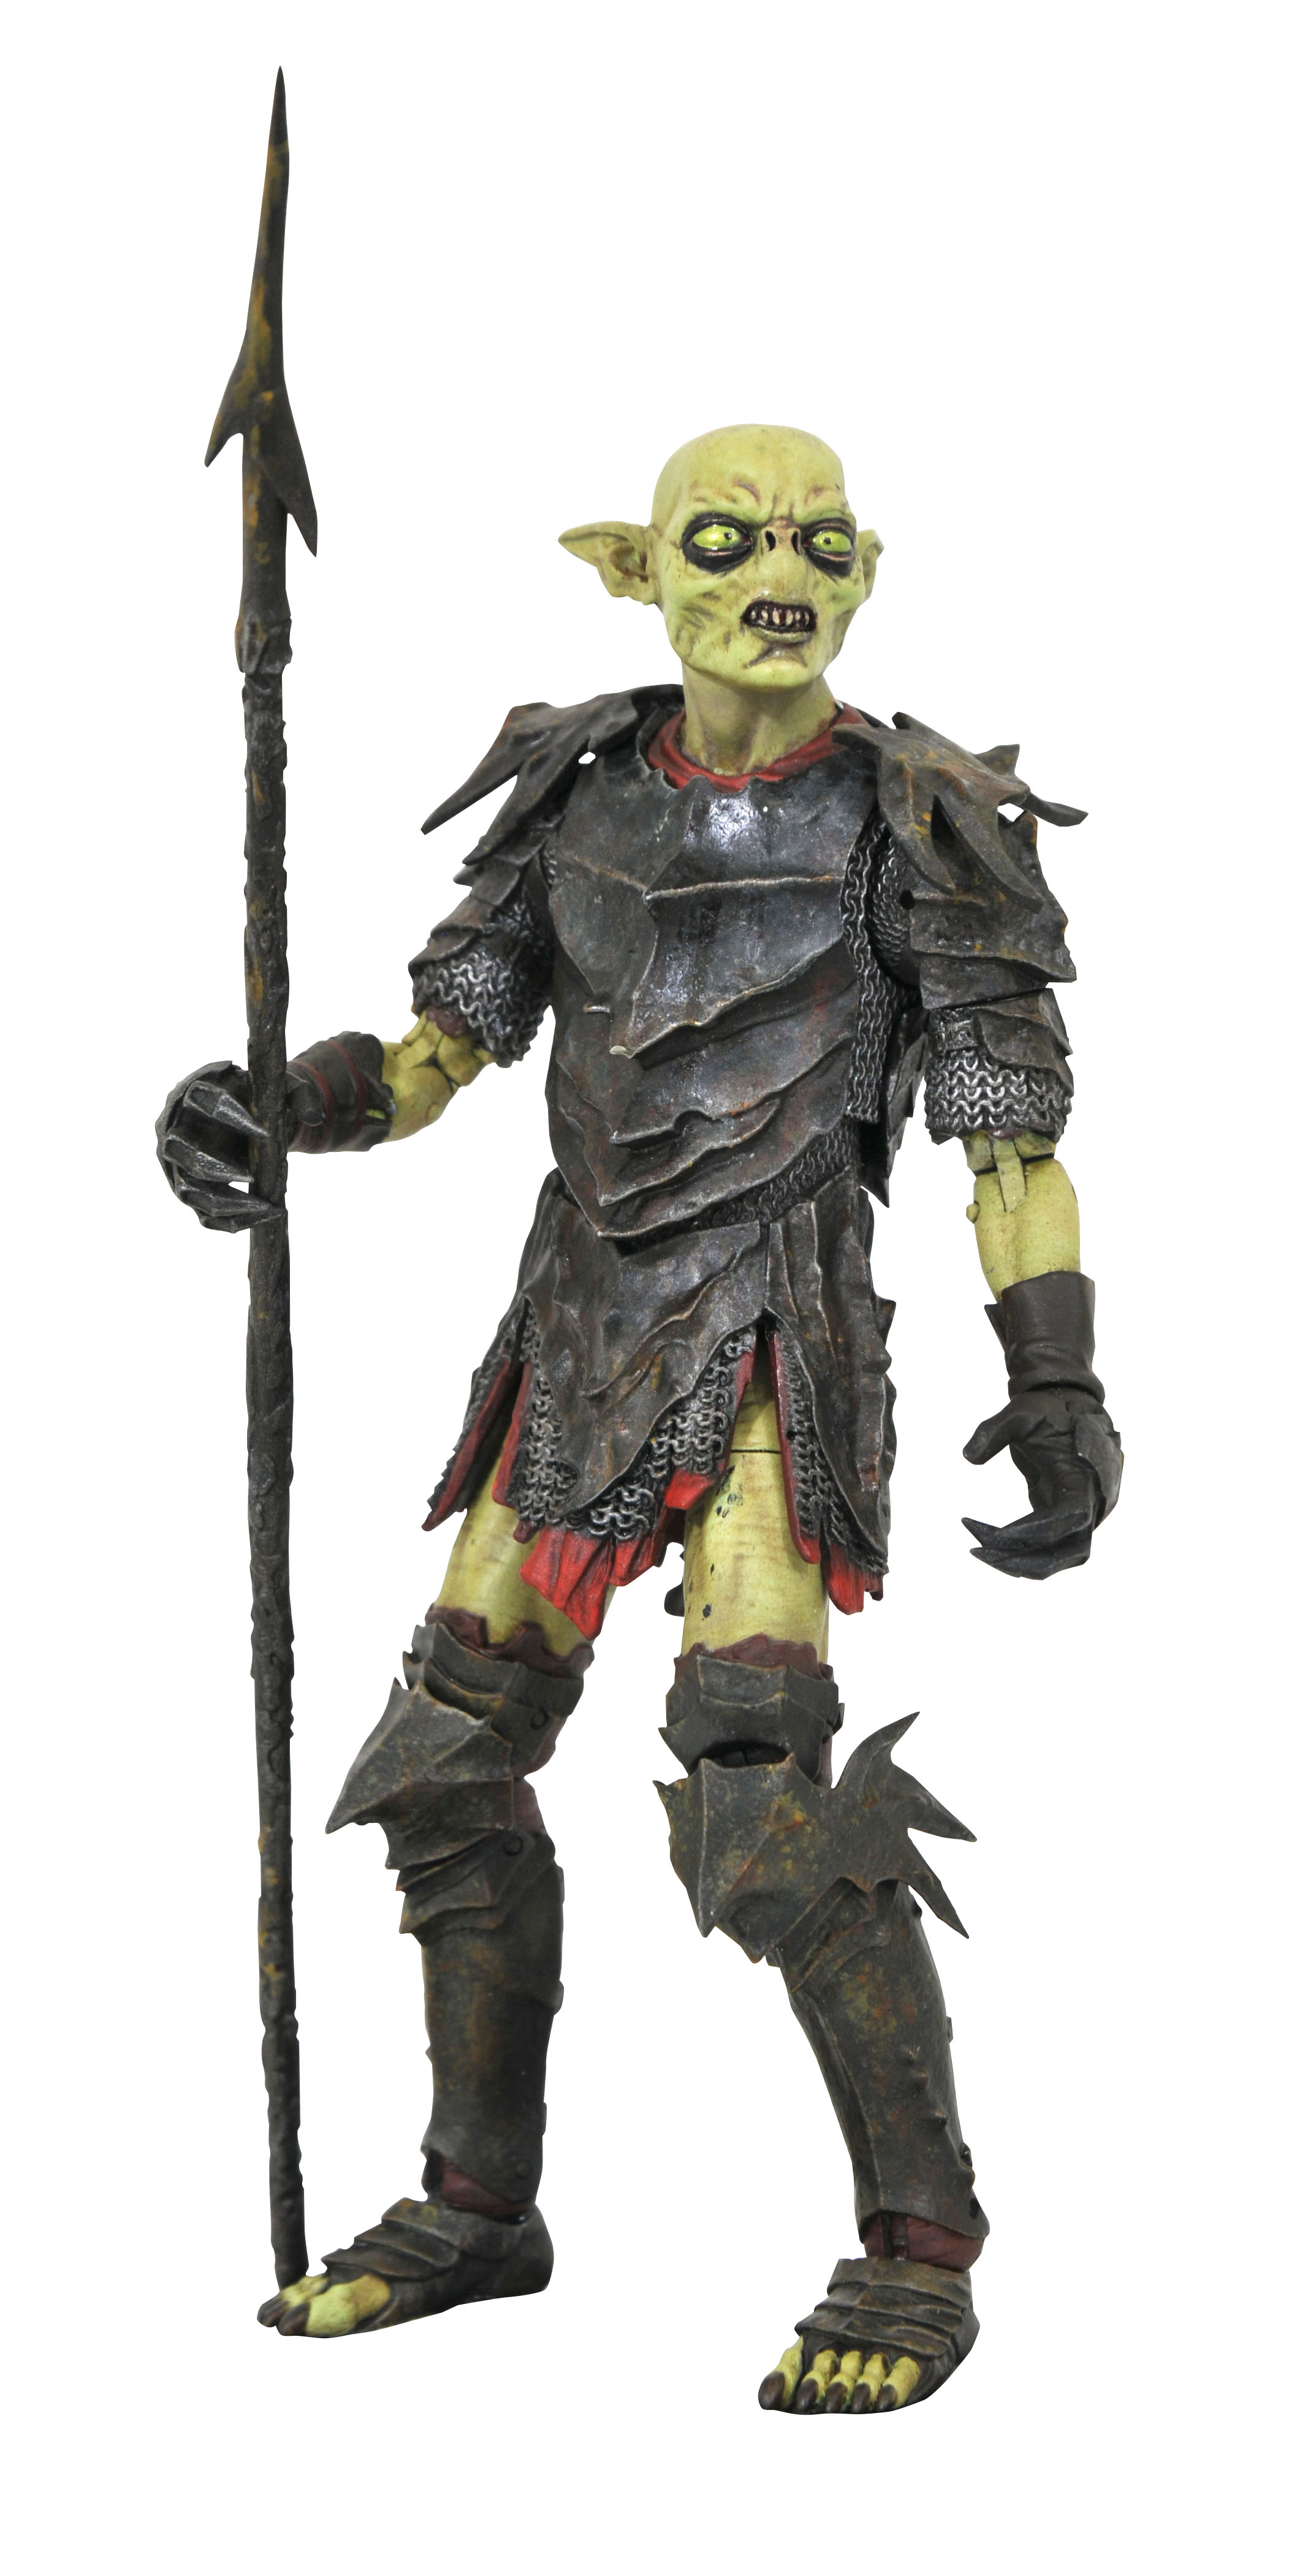 Lord of the Rings Moria Orc Deluxe Action Figure